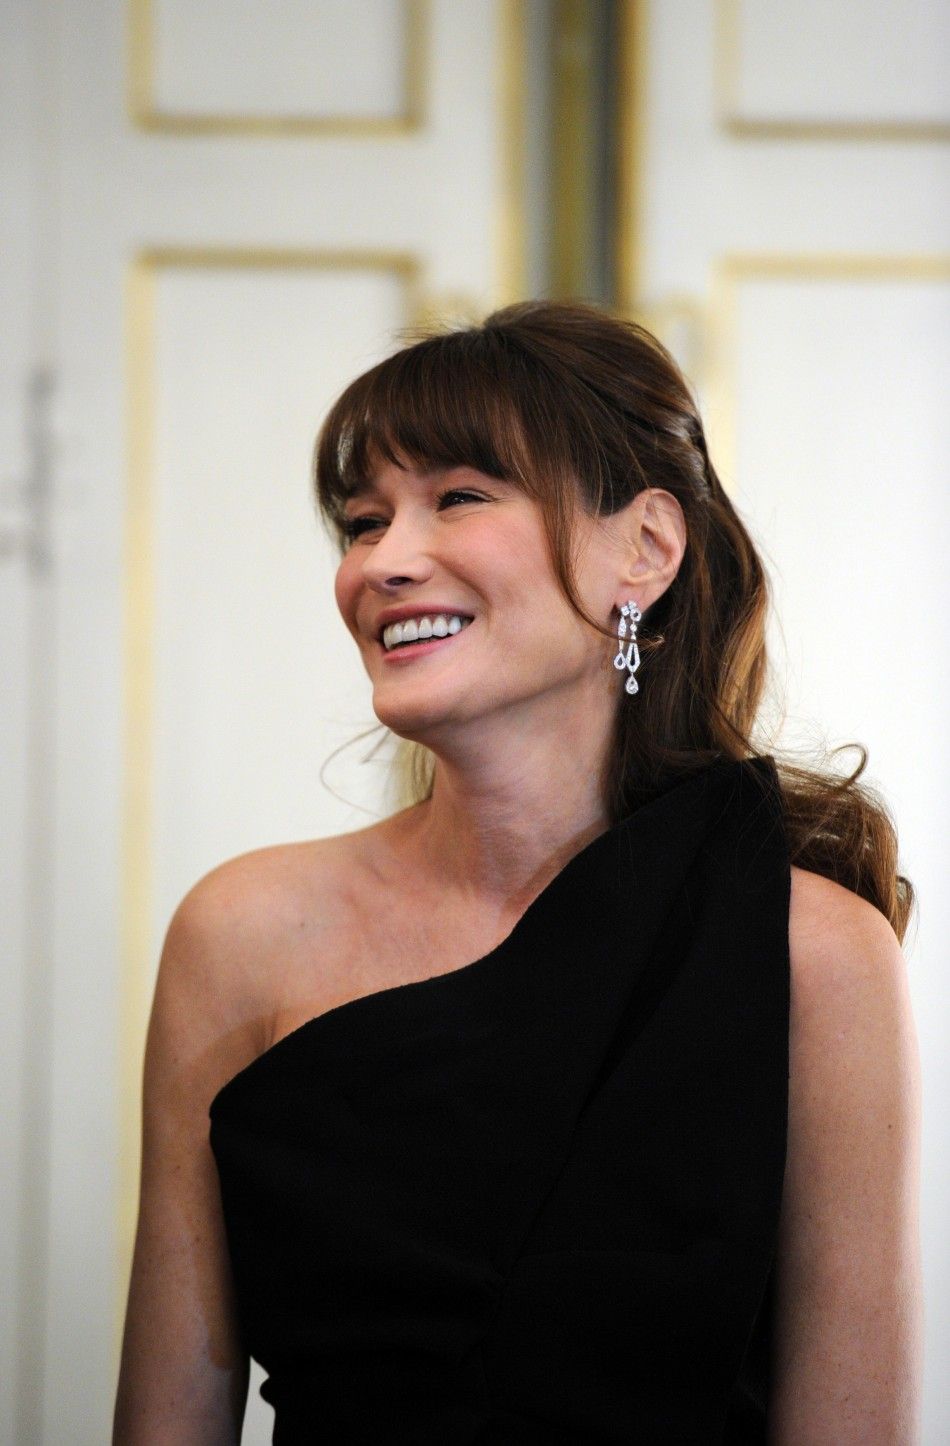 French President Nicolas Sarkozy039s wife Carla Bruni-Sarkozy welcomes guests prior to an official dinner at the Elysee Palace in Paris